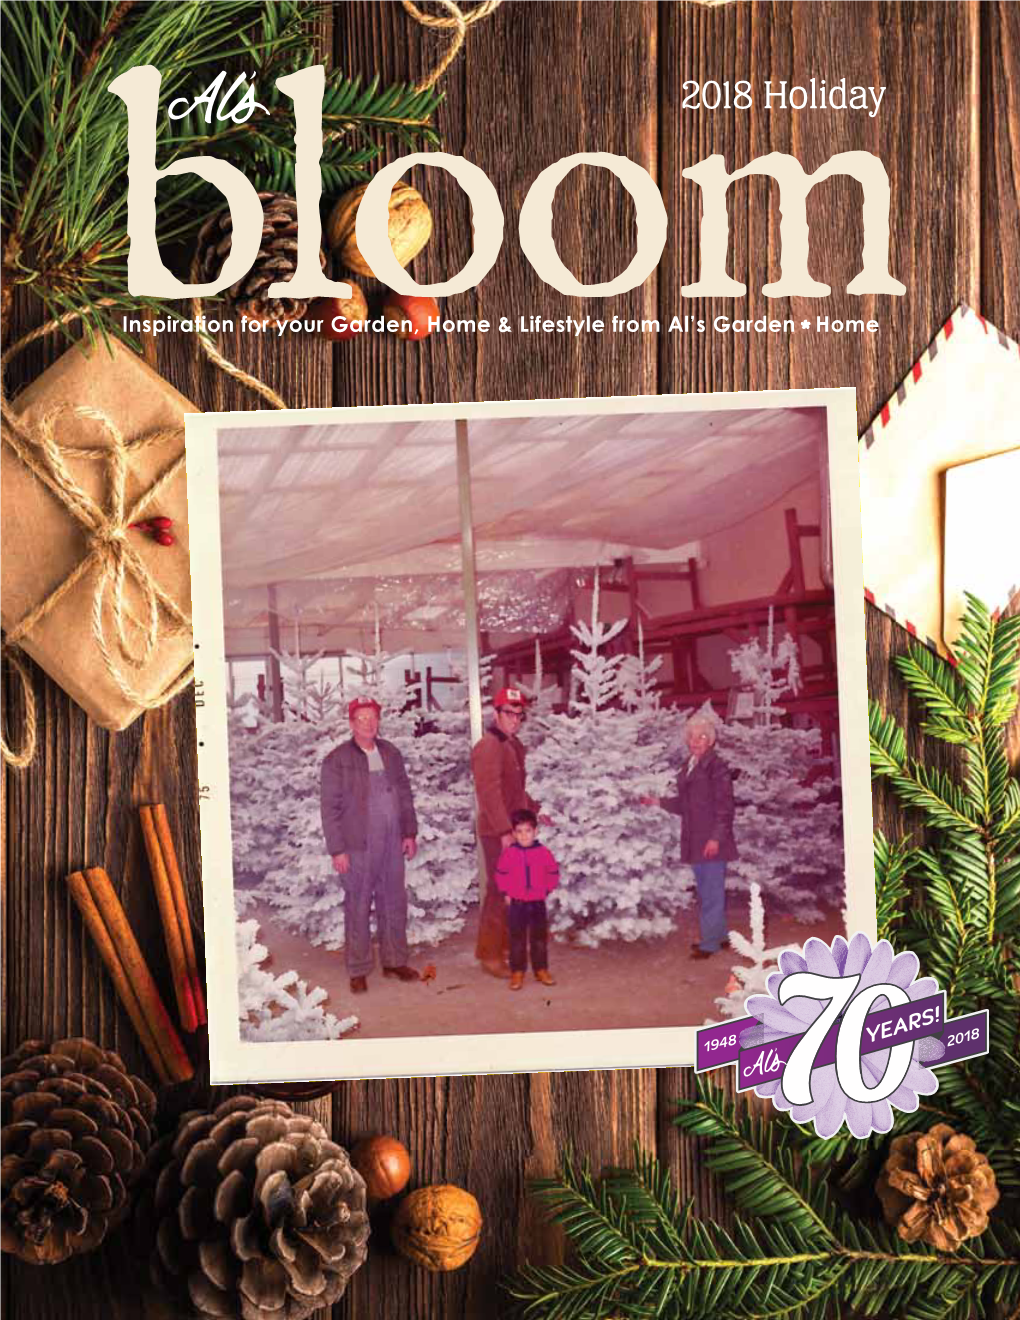 2018 Holiday Bloominspiration for Your Garden, Home & Lifestyle from Al’S Garden Home the Christmas Season Starts Holiday 2018 with Al’S Annual 5 12 16